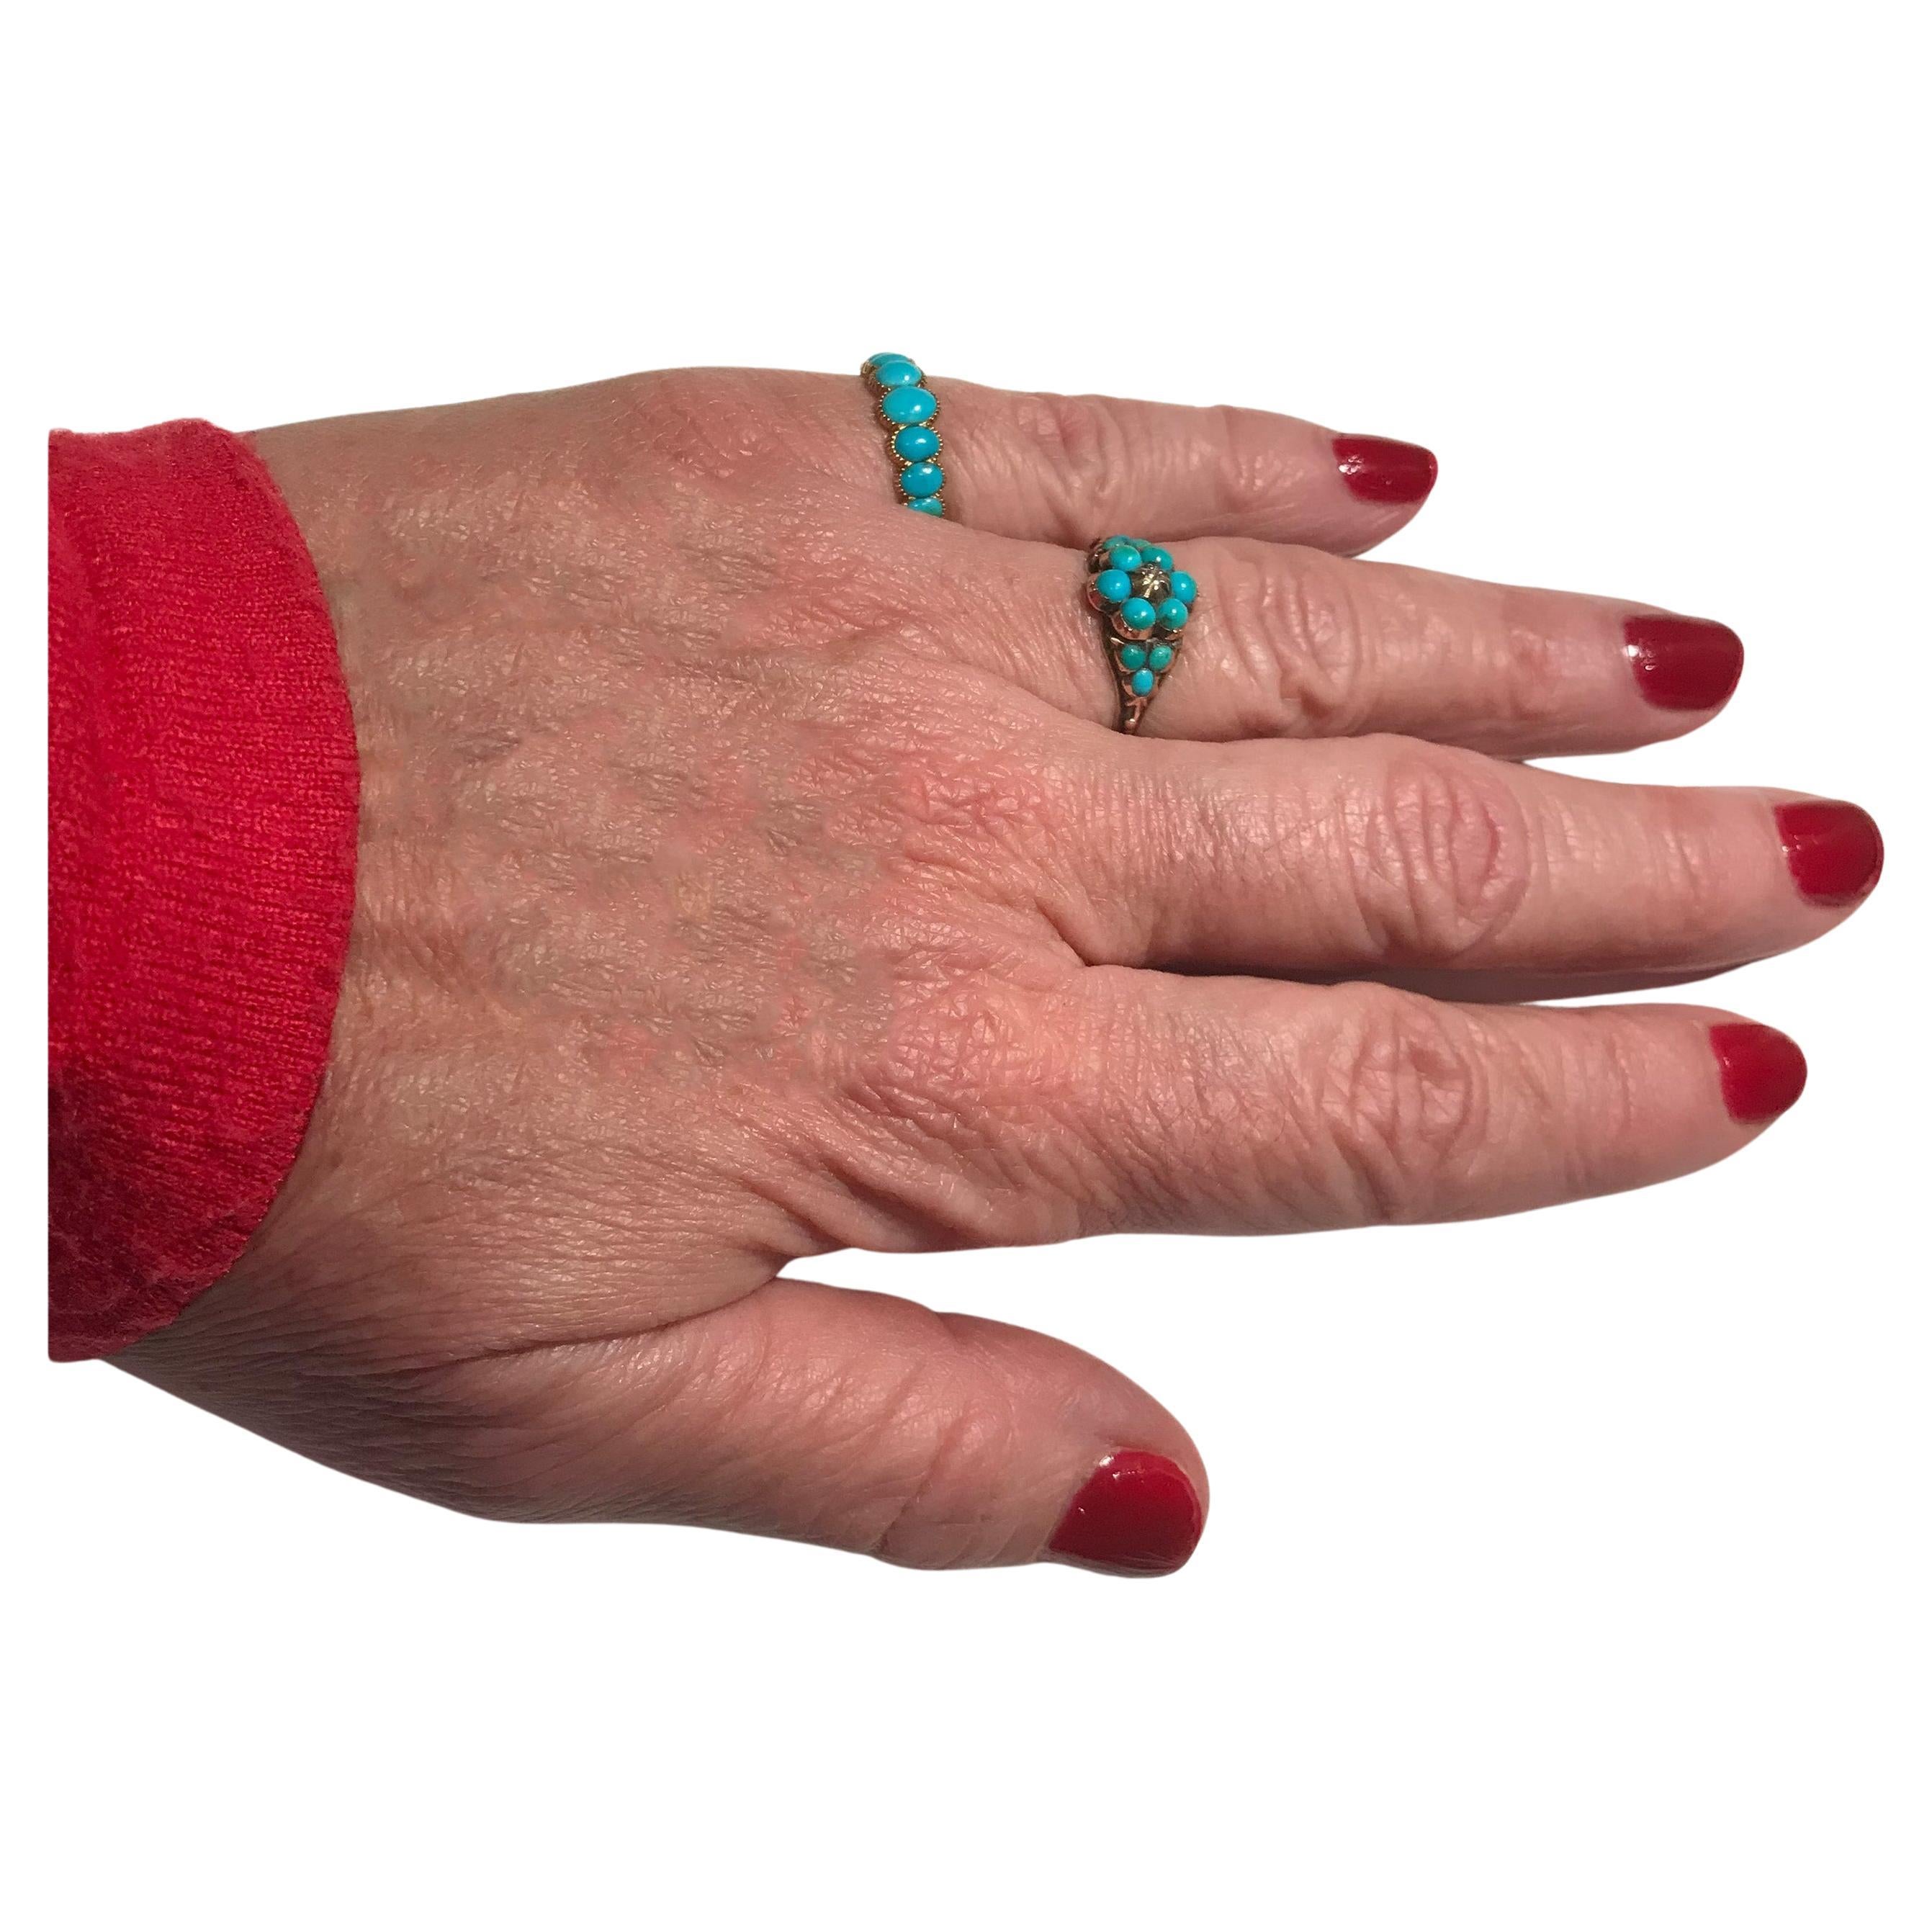 Late Georgian half hoop ring with 7 well matched turquoise stones set en cabochon with the largest turquoise in the center and each stone graduated in size, individually hand carved in a floral chased band. The borders of each stone are crimped, an